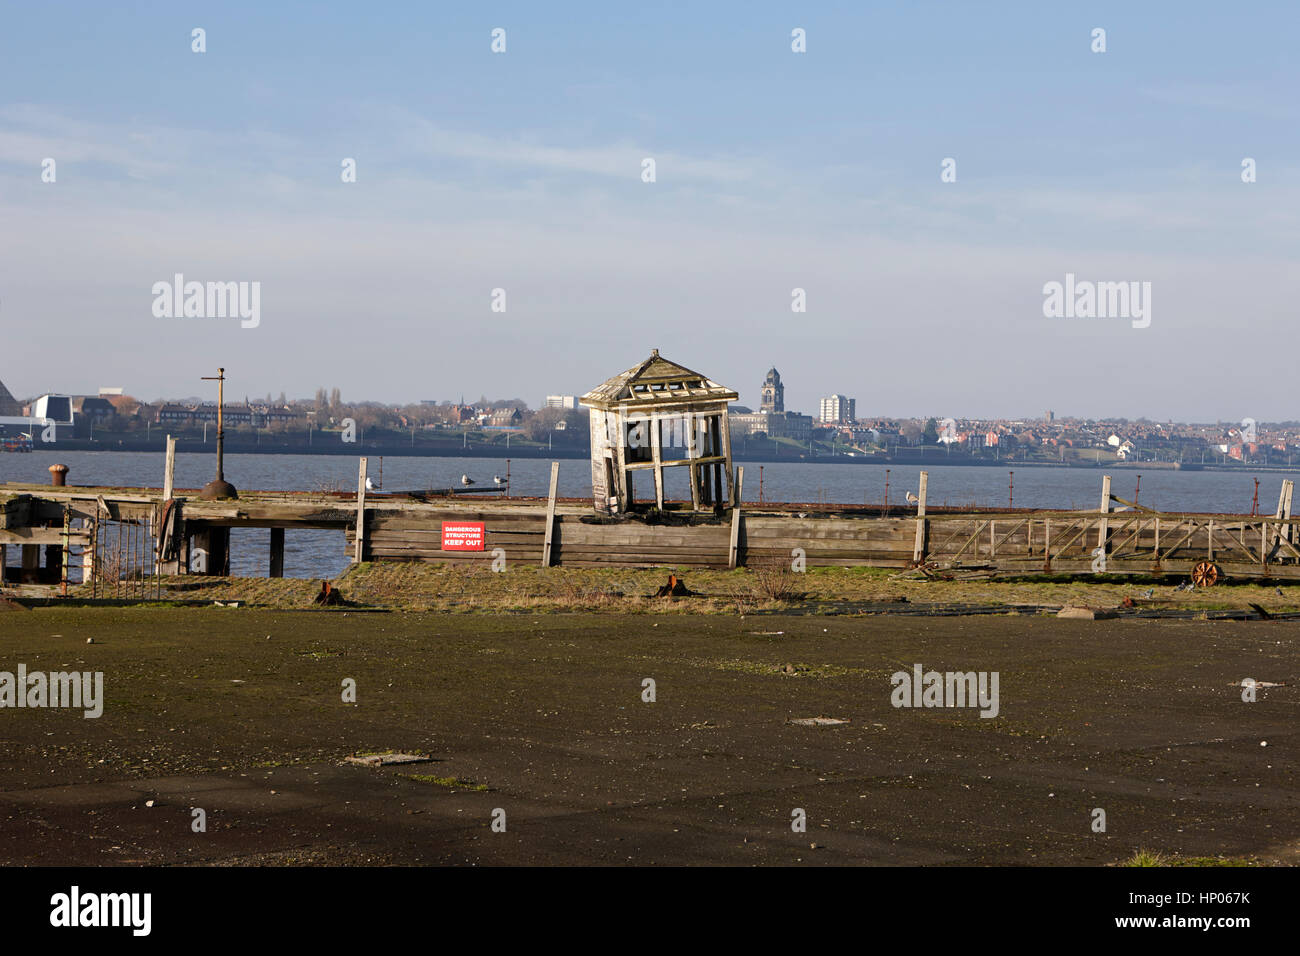 old wooden hut on princes jetty former cattle landing stage liverpool docks uk Stock Photo